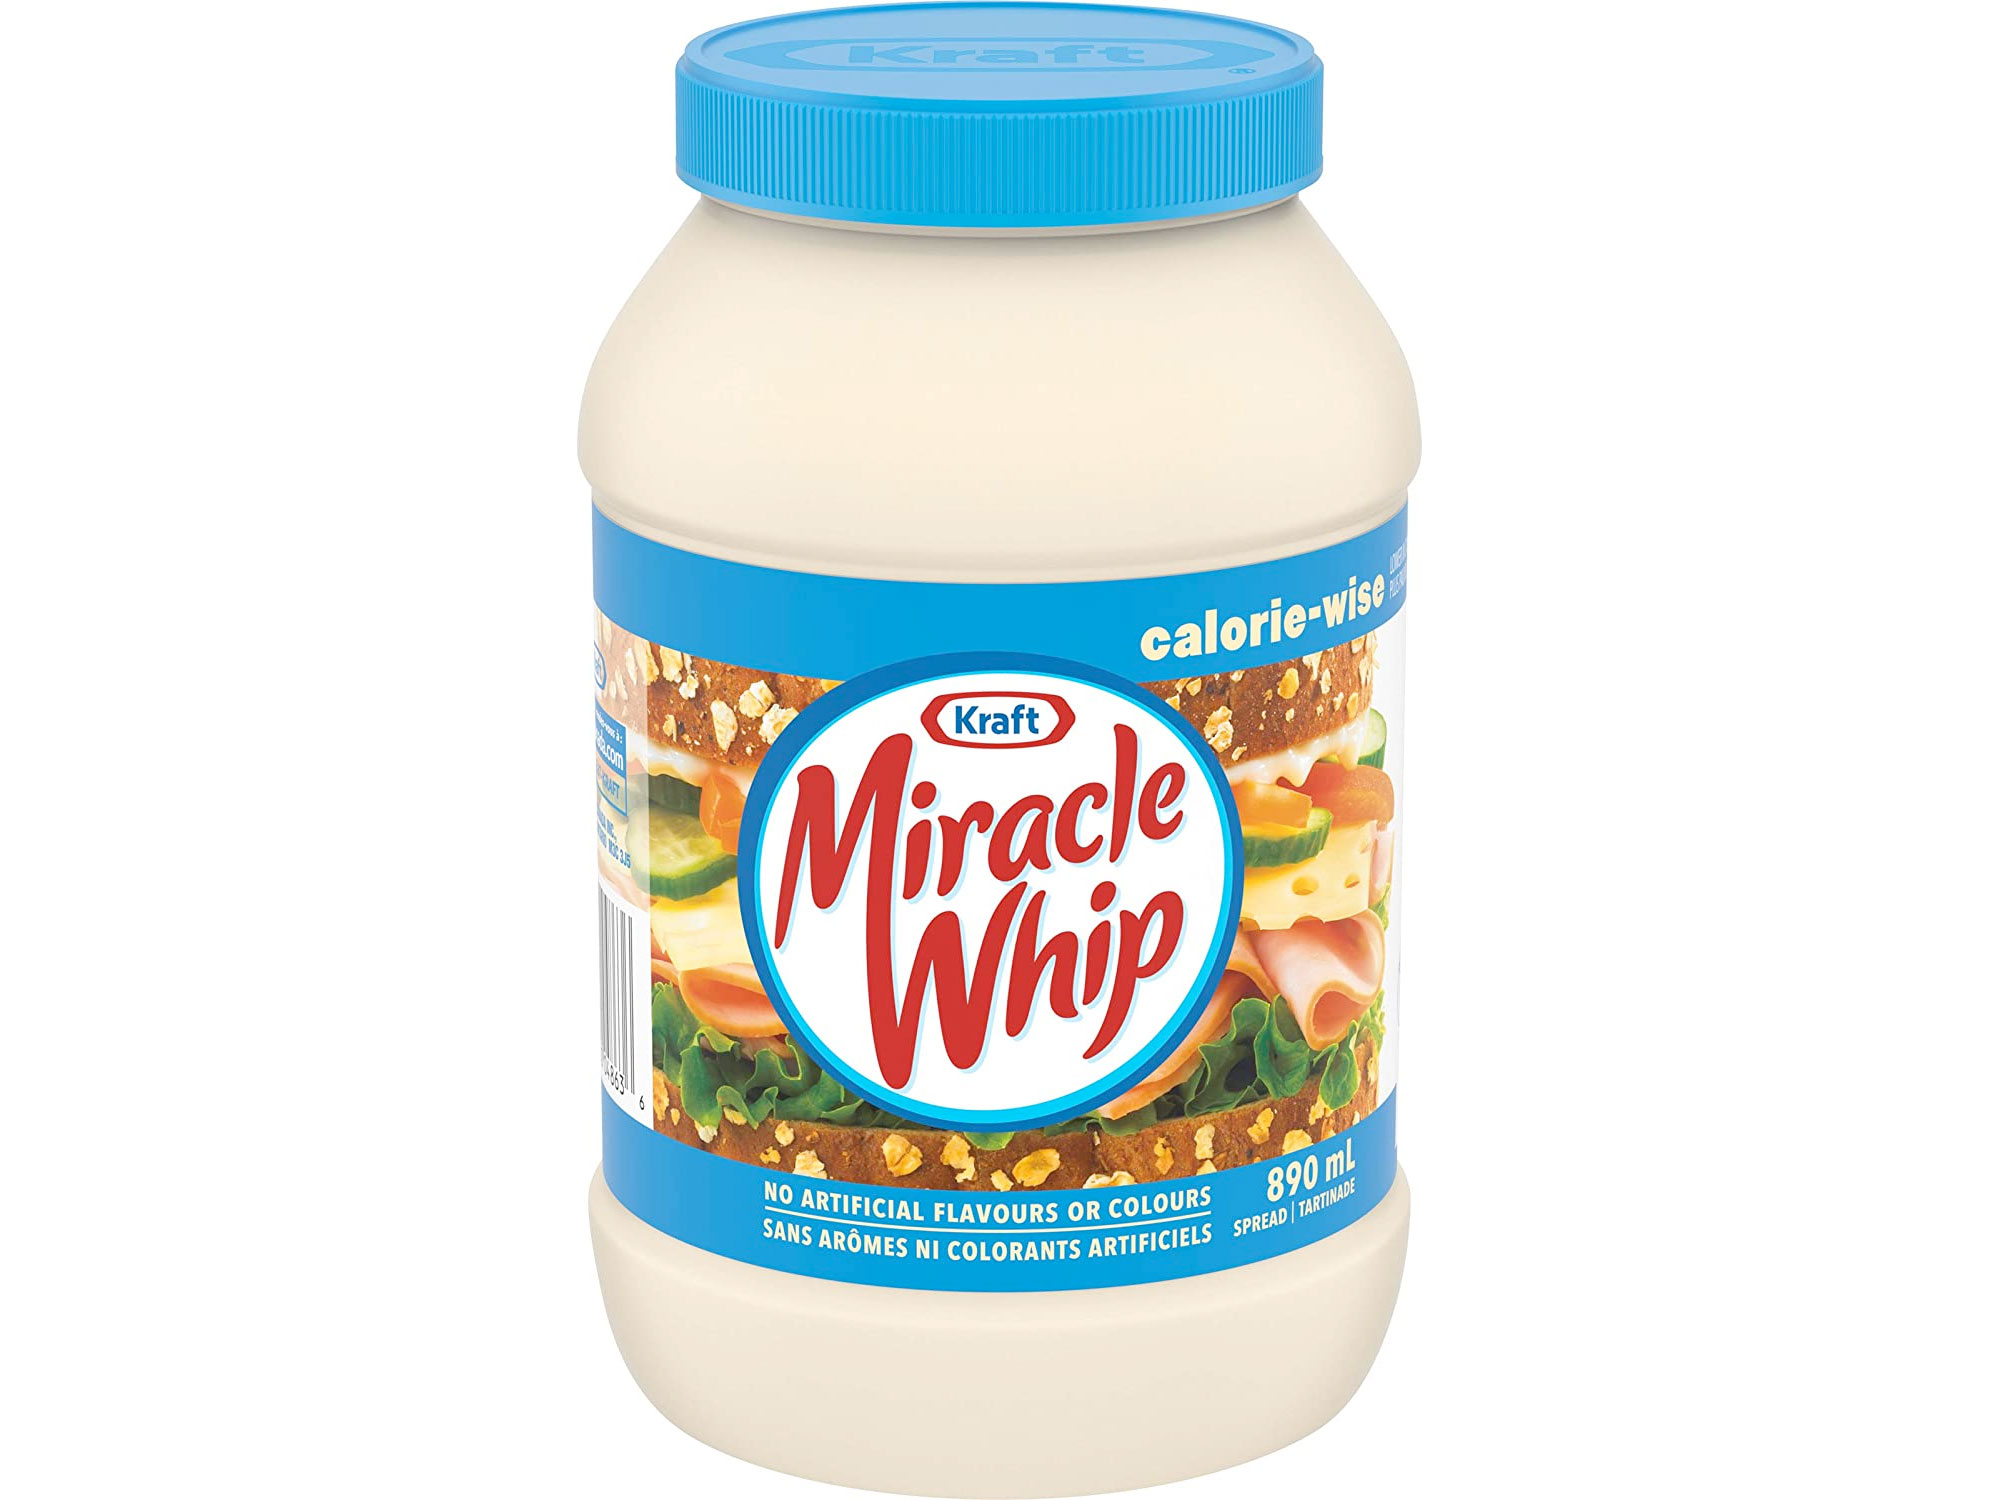 Amazon：Miracle Whip Calorie Wise Dressing (890 ml)只卖$3.99